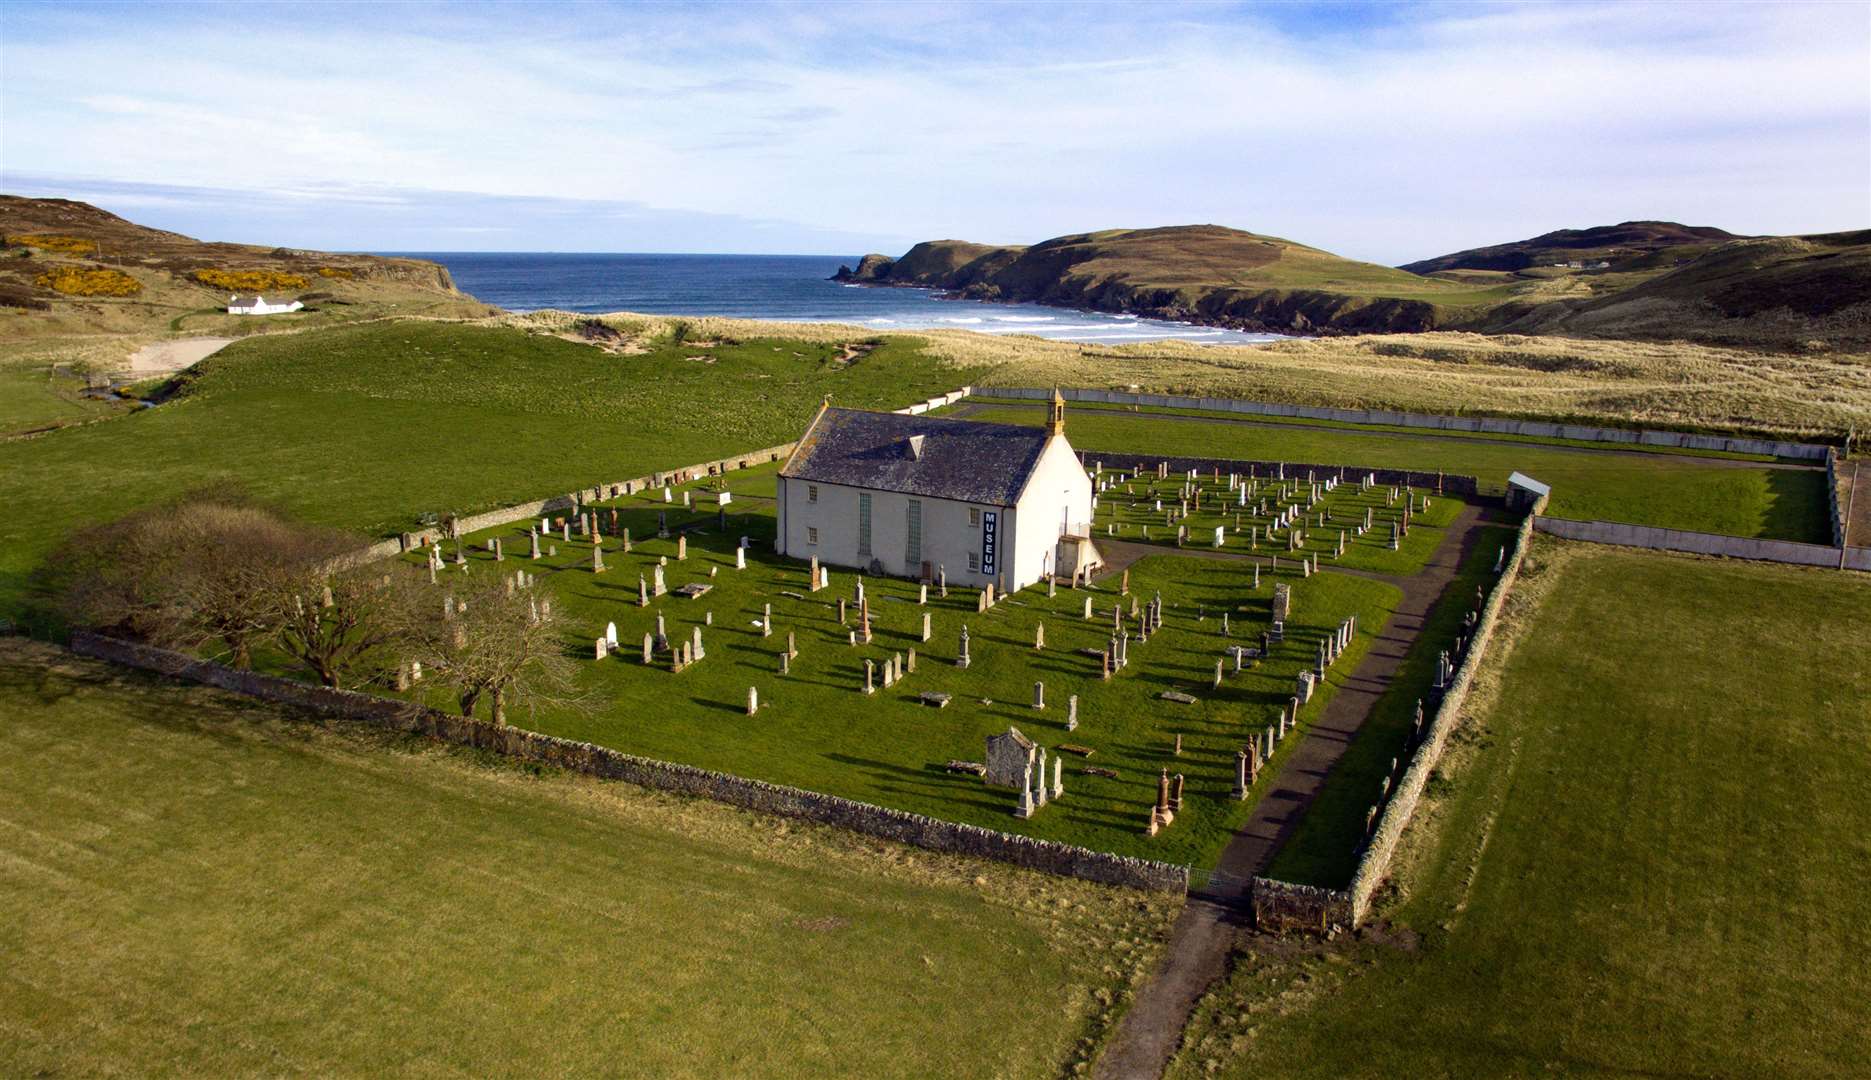 Strathnaver Museum at Bettyhill is one of the venues participating in Doors Open Days 2022 during September.